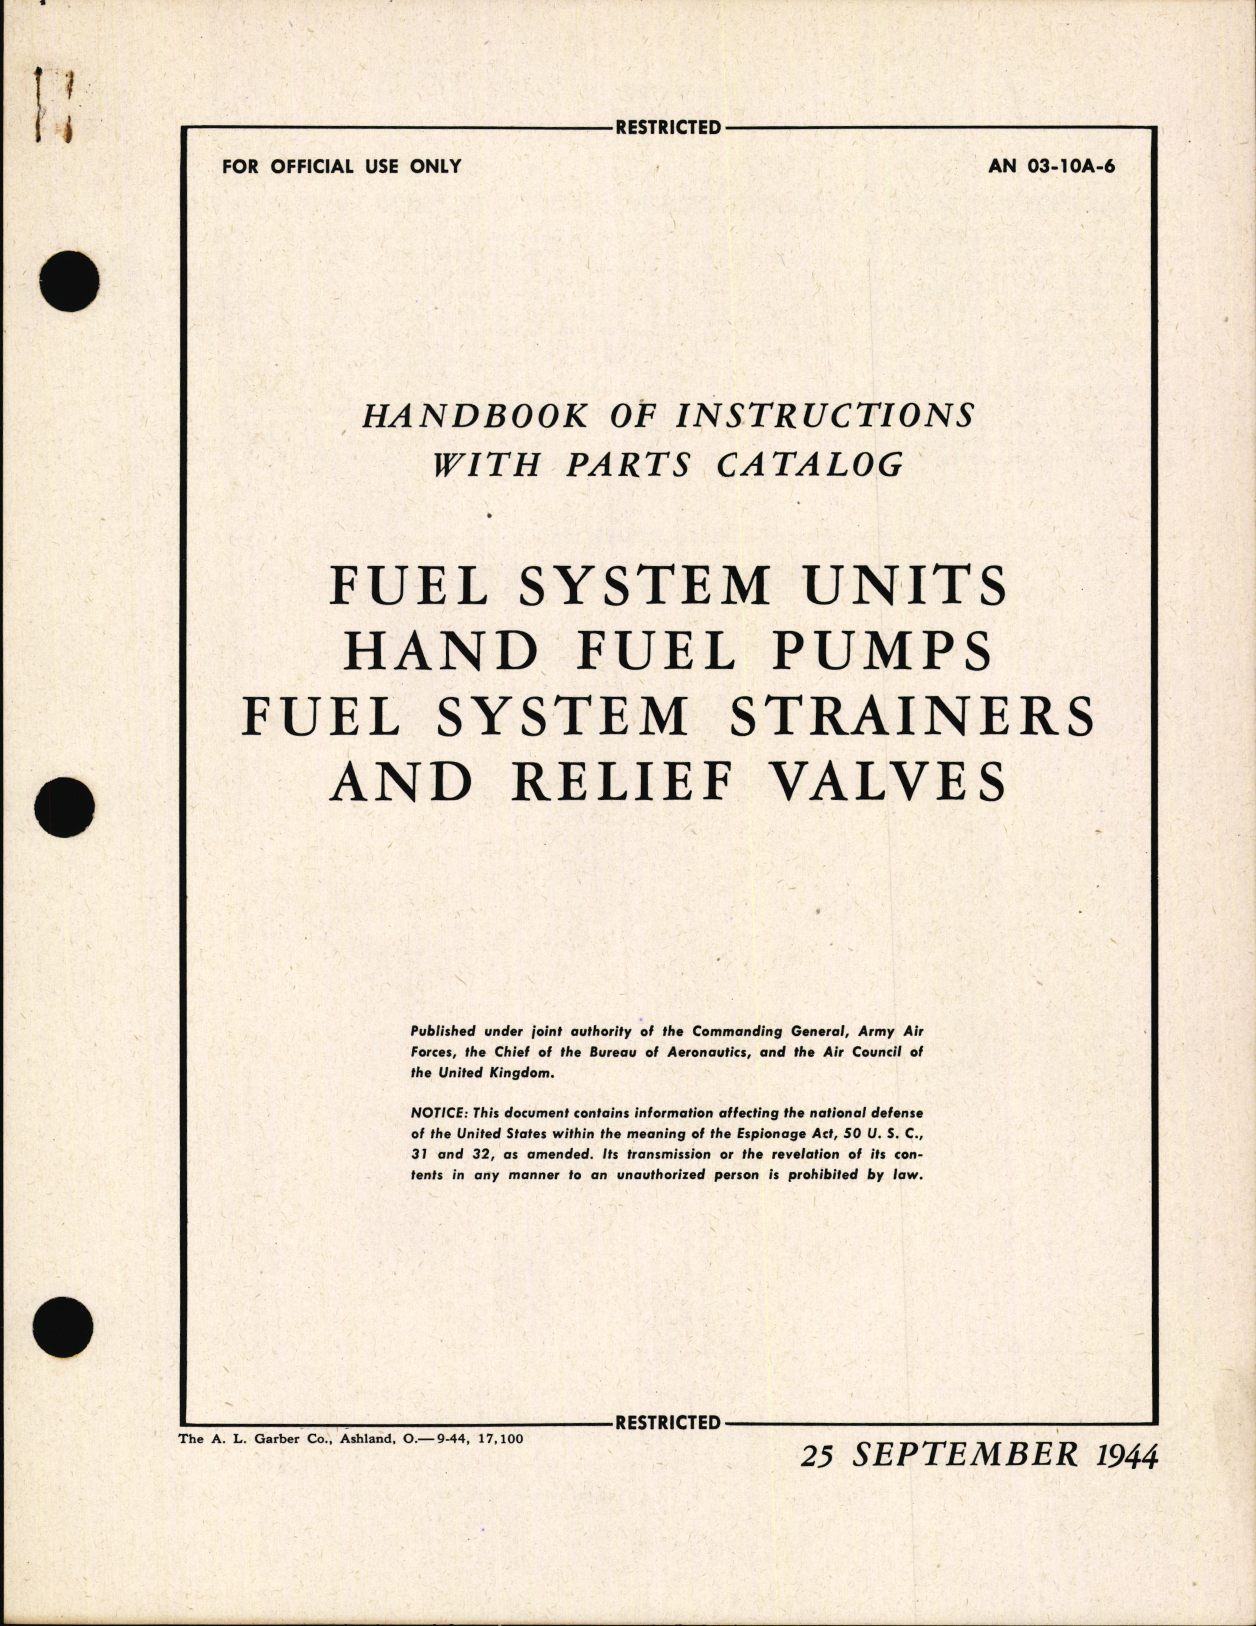 Sample page 1 from AirCorps Library document: Handbook of Instructions with Parts Catalog for Fuel System Units, Hand Fuel Pumps, Fuel System Strainers, and Relief Valves